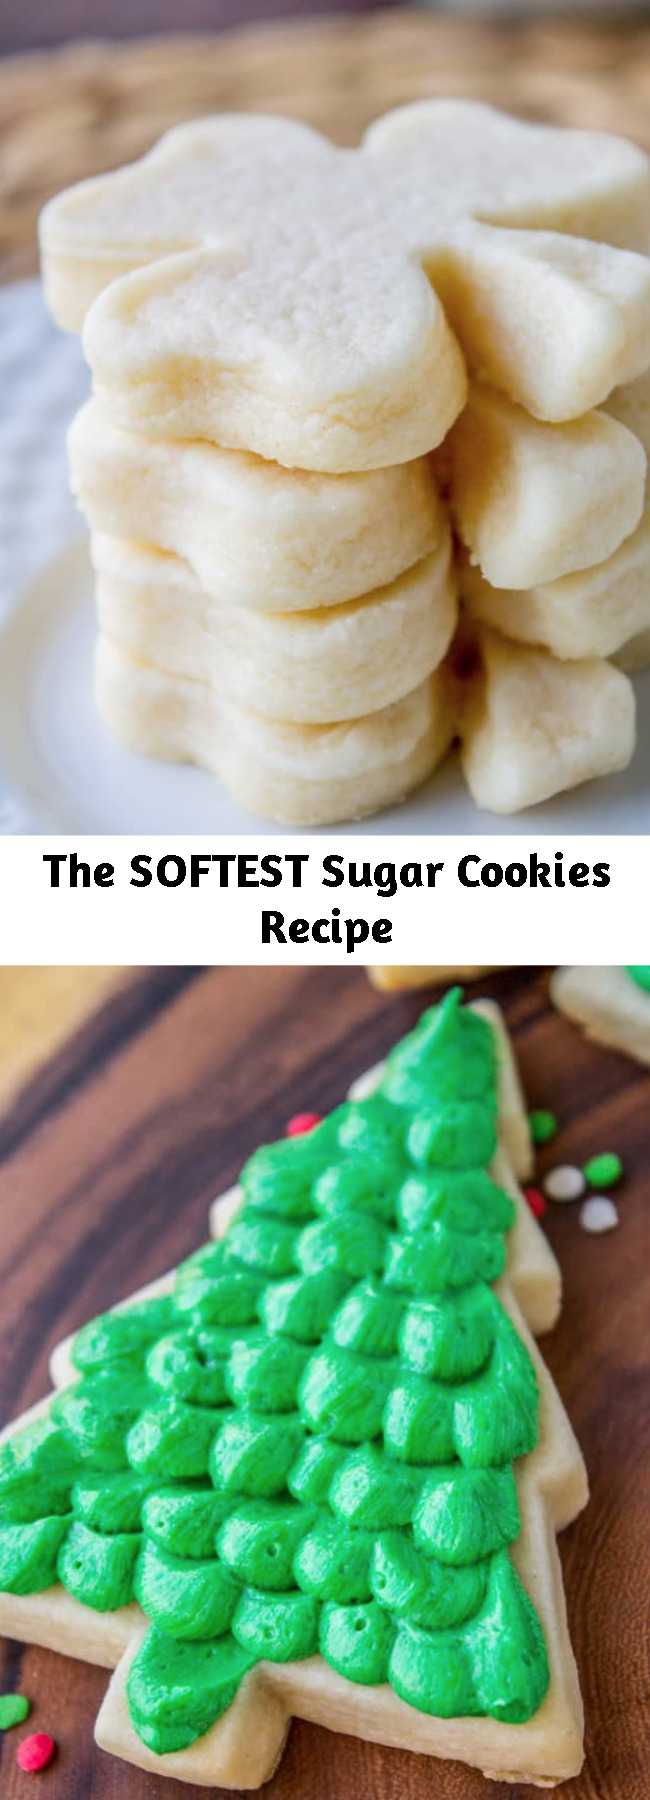 The SOFTEST Sugar Cookies Recipe - A secret ingredient in this sugar cookies recipe makes these cookies the SOFTEST and most flavorful cookies of your life! And they even hold their shape after baking, so you get exactly what you want instead of sad blob cookies.